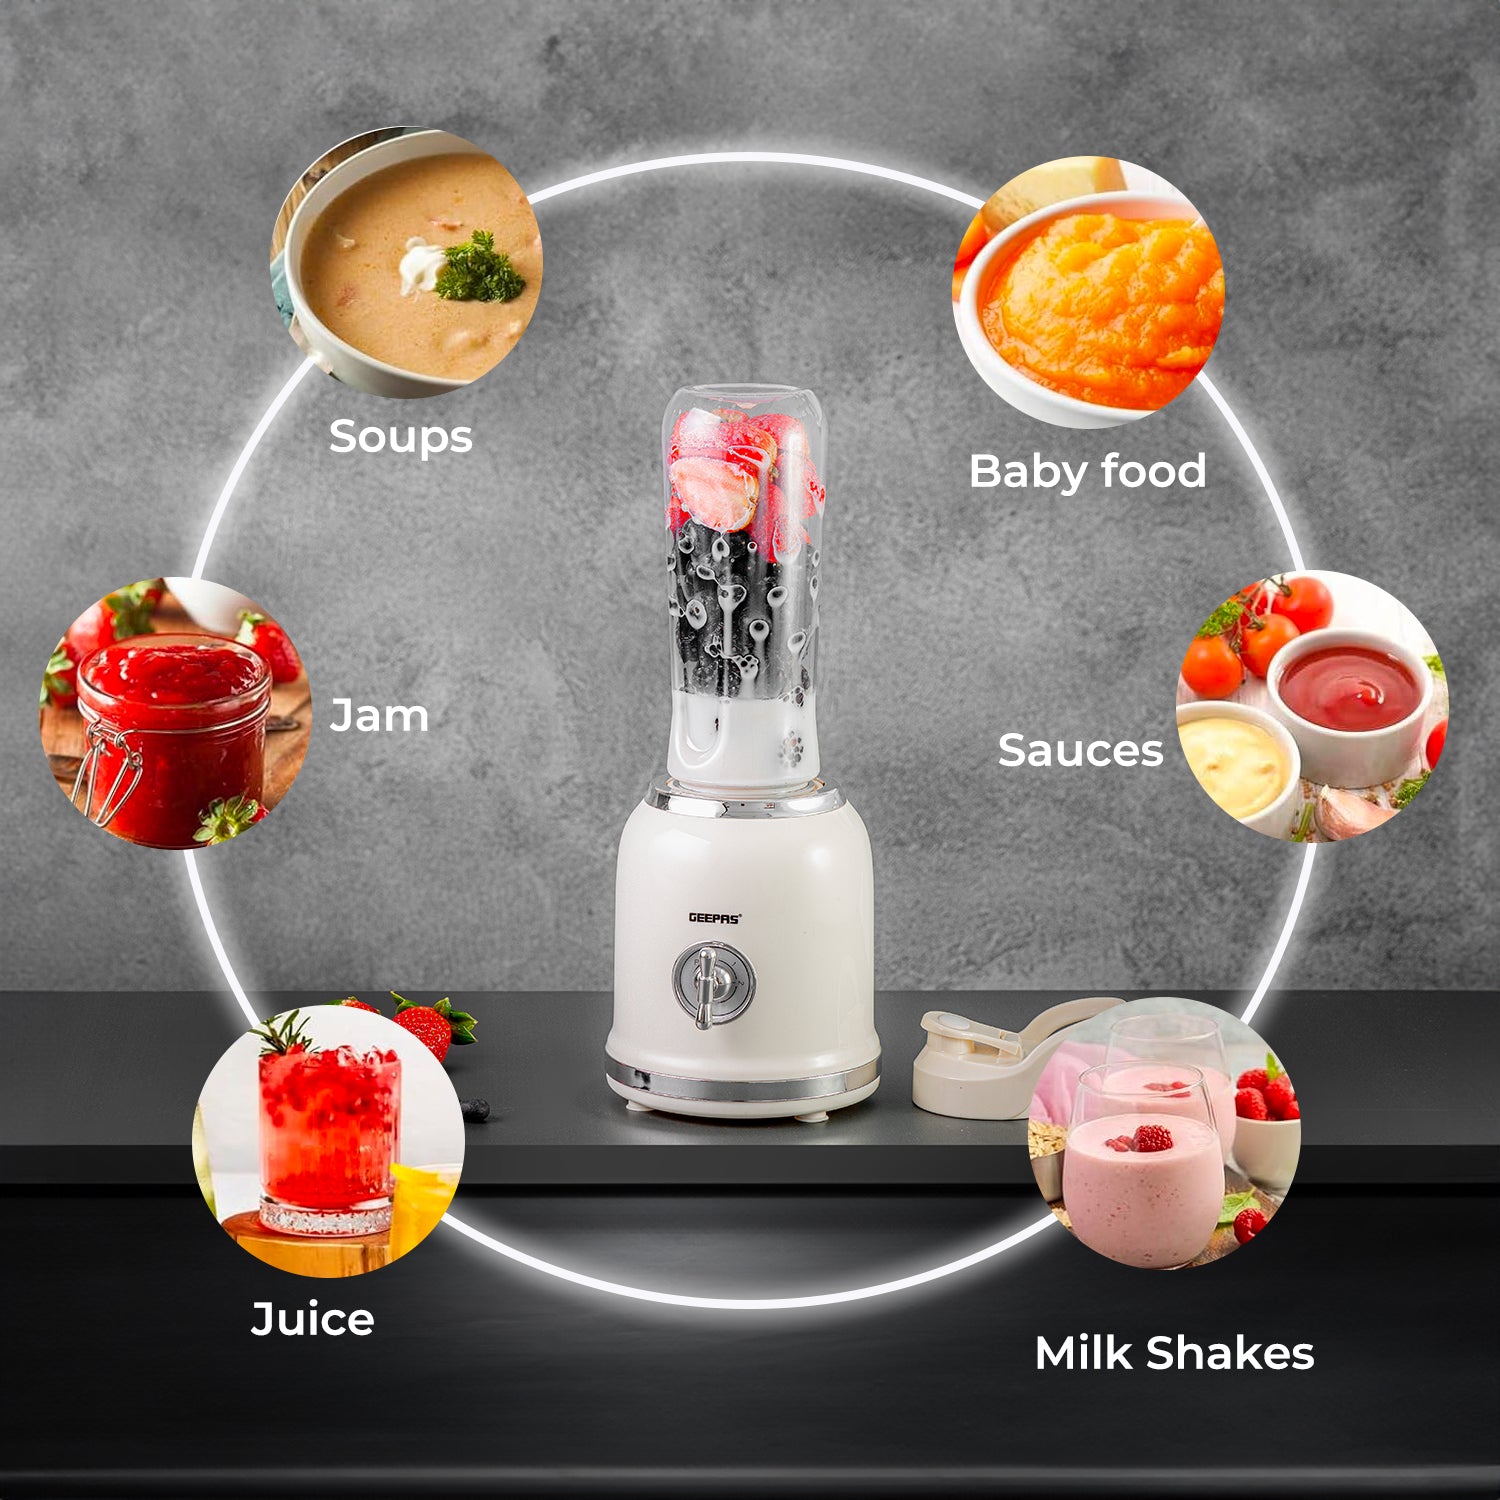 The image shows the variety of tasks the blender can be used for including making juices, milk shakes, sauces, soups, smoothies and so much more